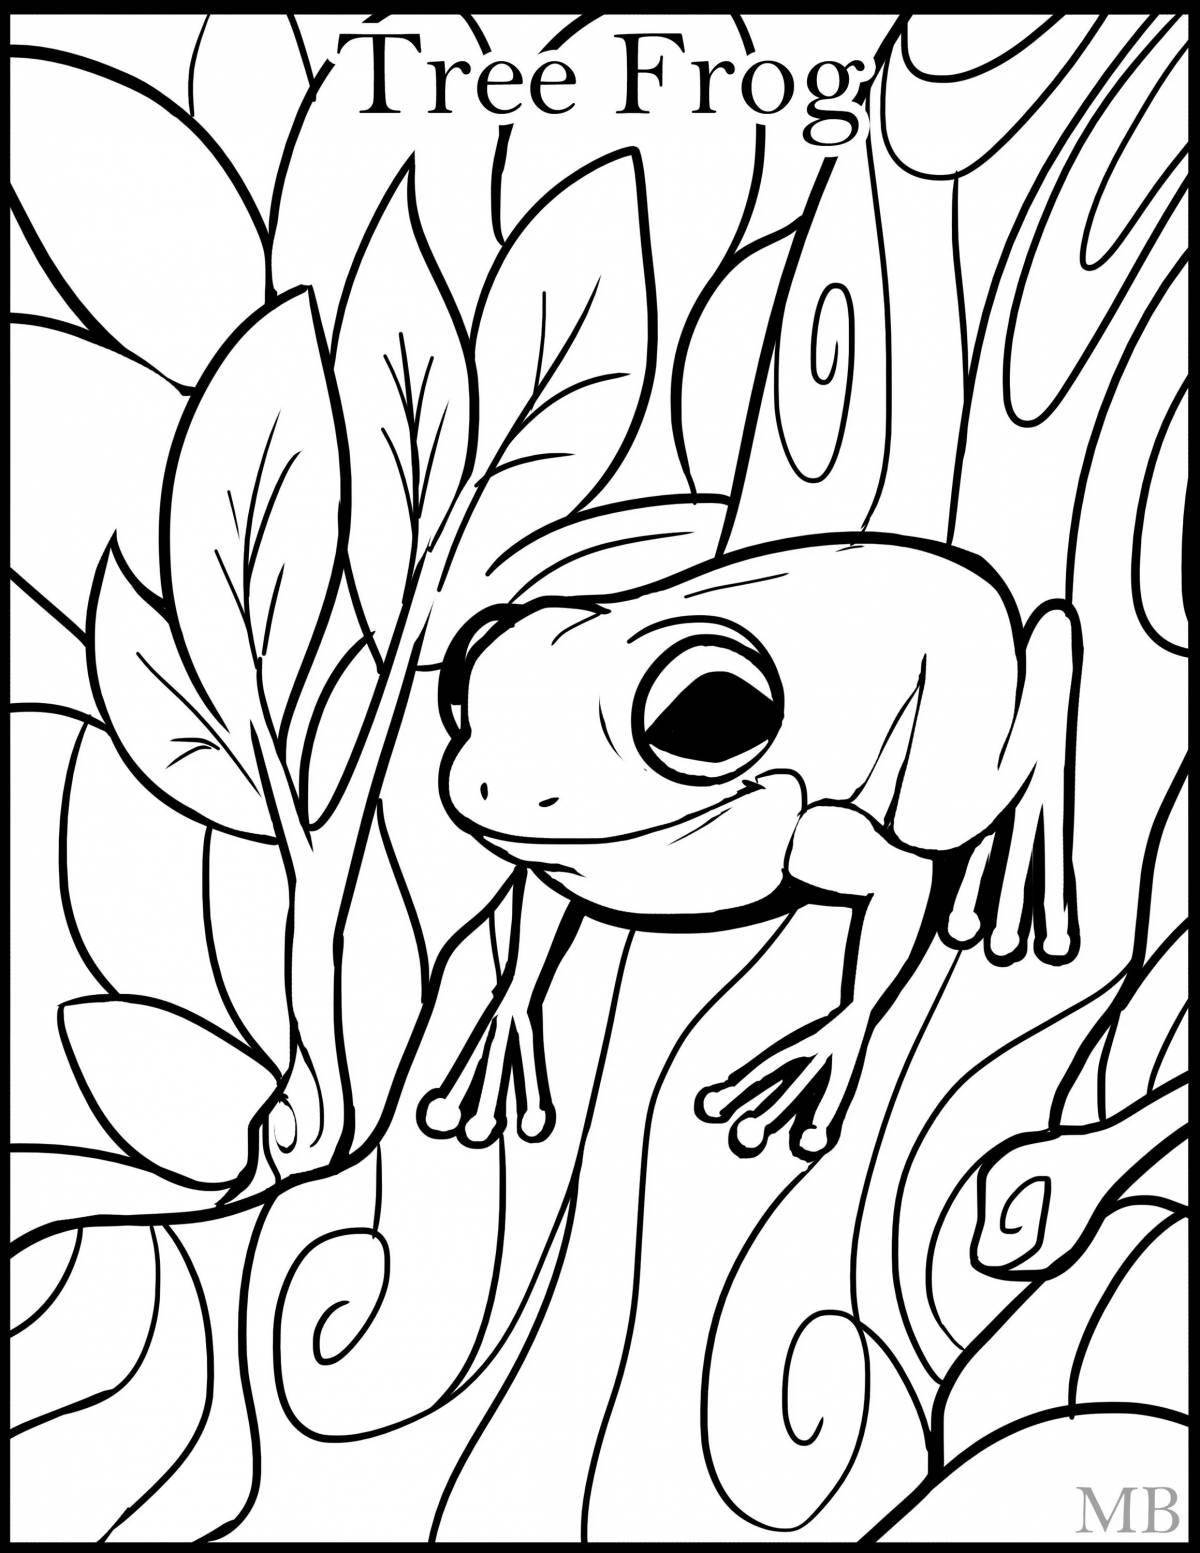 Expressive coloring cute frog